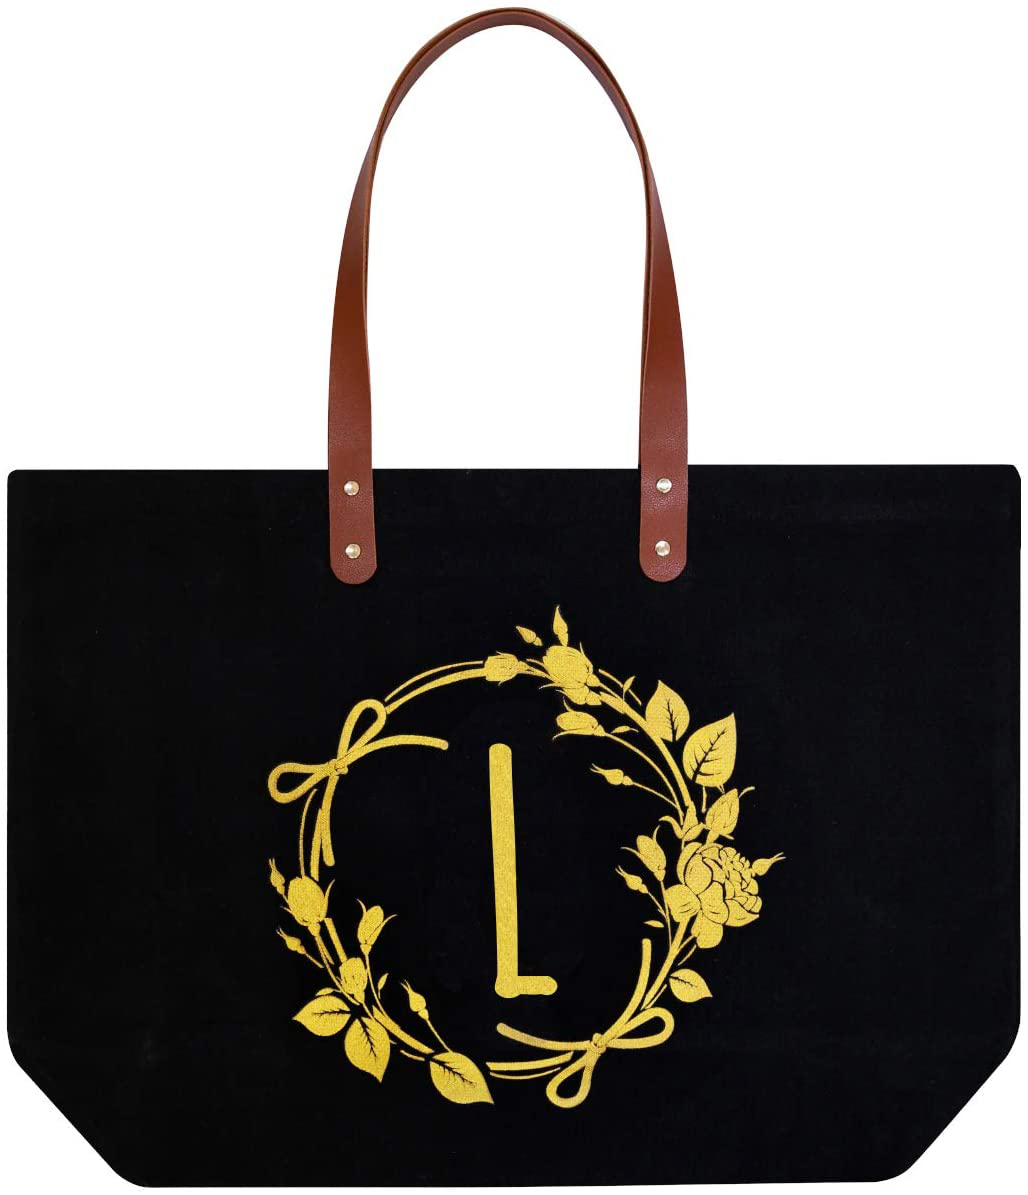 ElegantPark Monogrammed Gifts for Women Personalized Tote Bags Monogram A Initial Bag Totes for Wedding Bride Bridesmaid Gifts Birthday Gifts Teacher Gifts Bag with Pocket Black Canvas